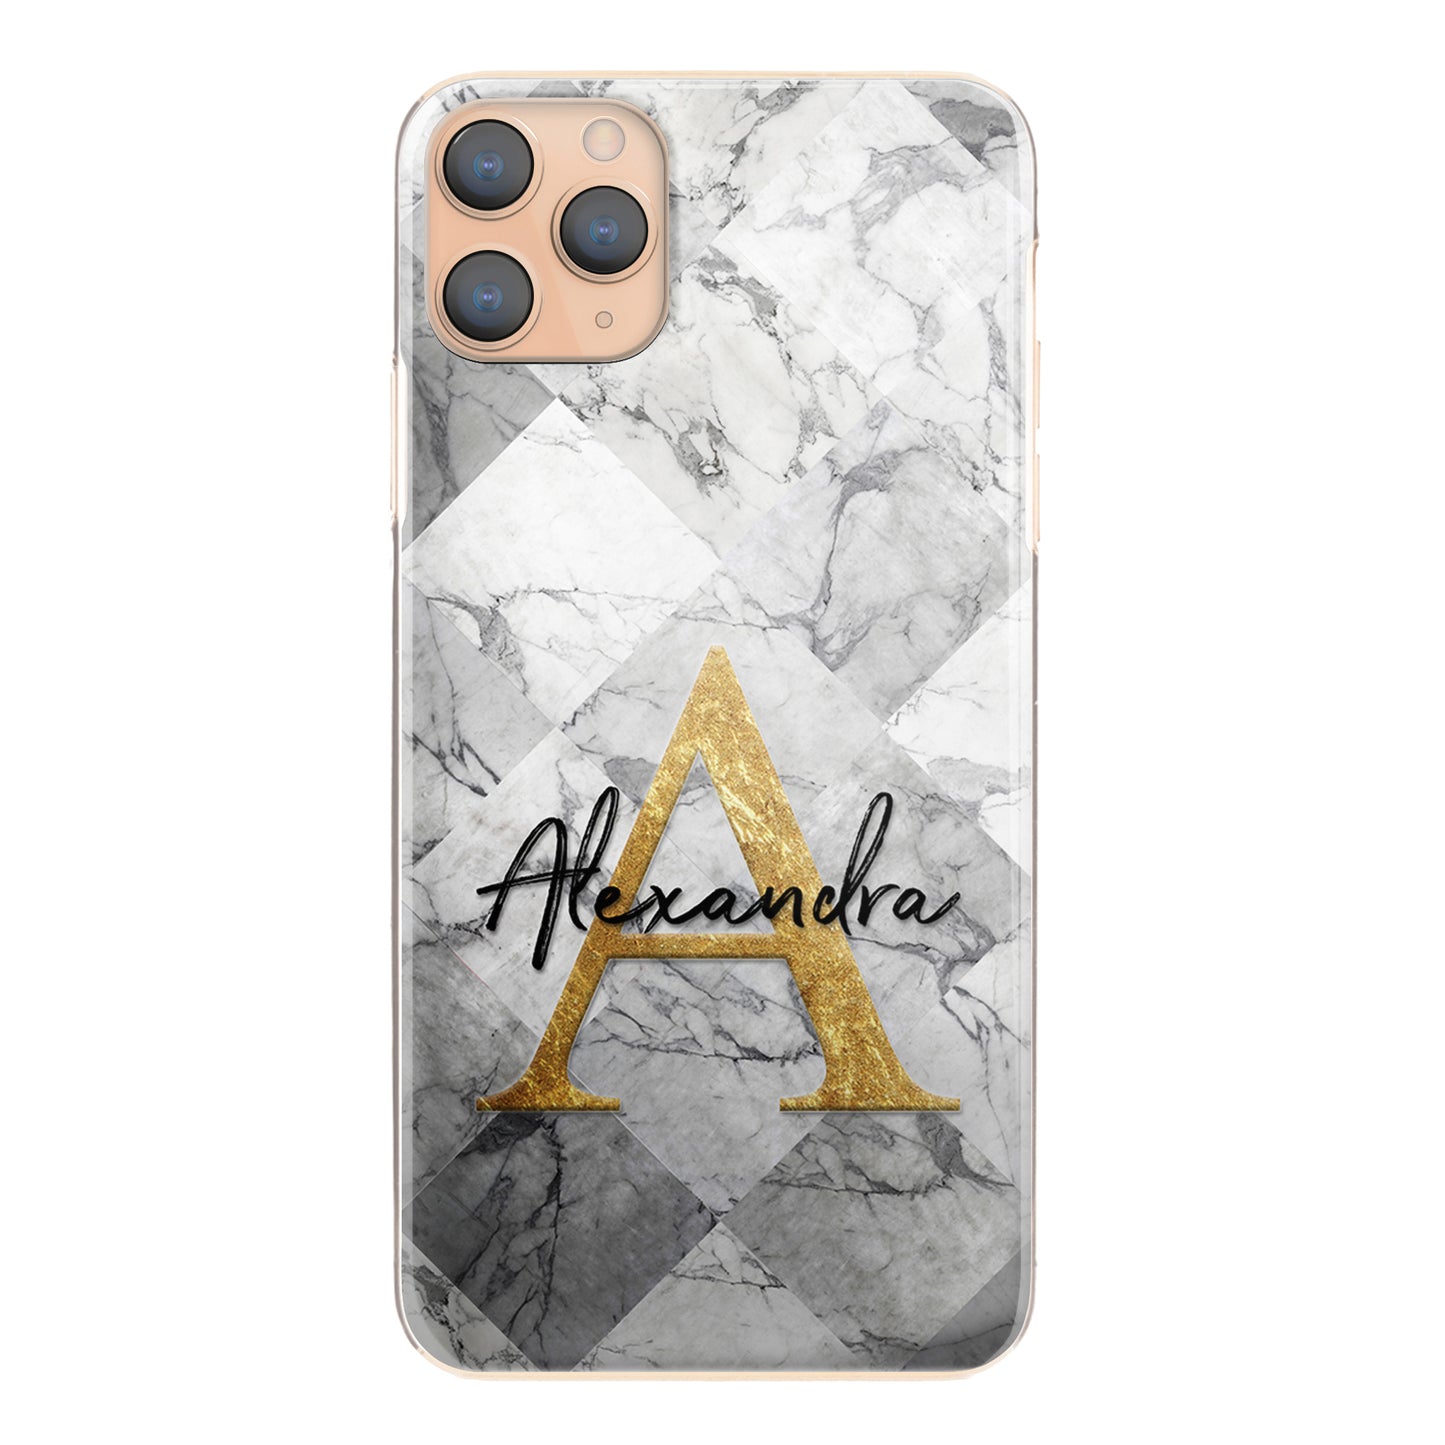 Personalised Xiaomi Phone Hard Case with Gold Monogram and Stylish Text on Patterned Grey Marble